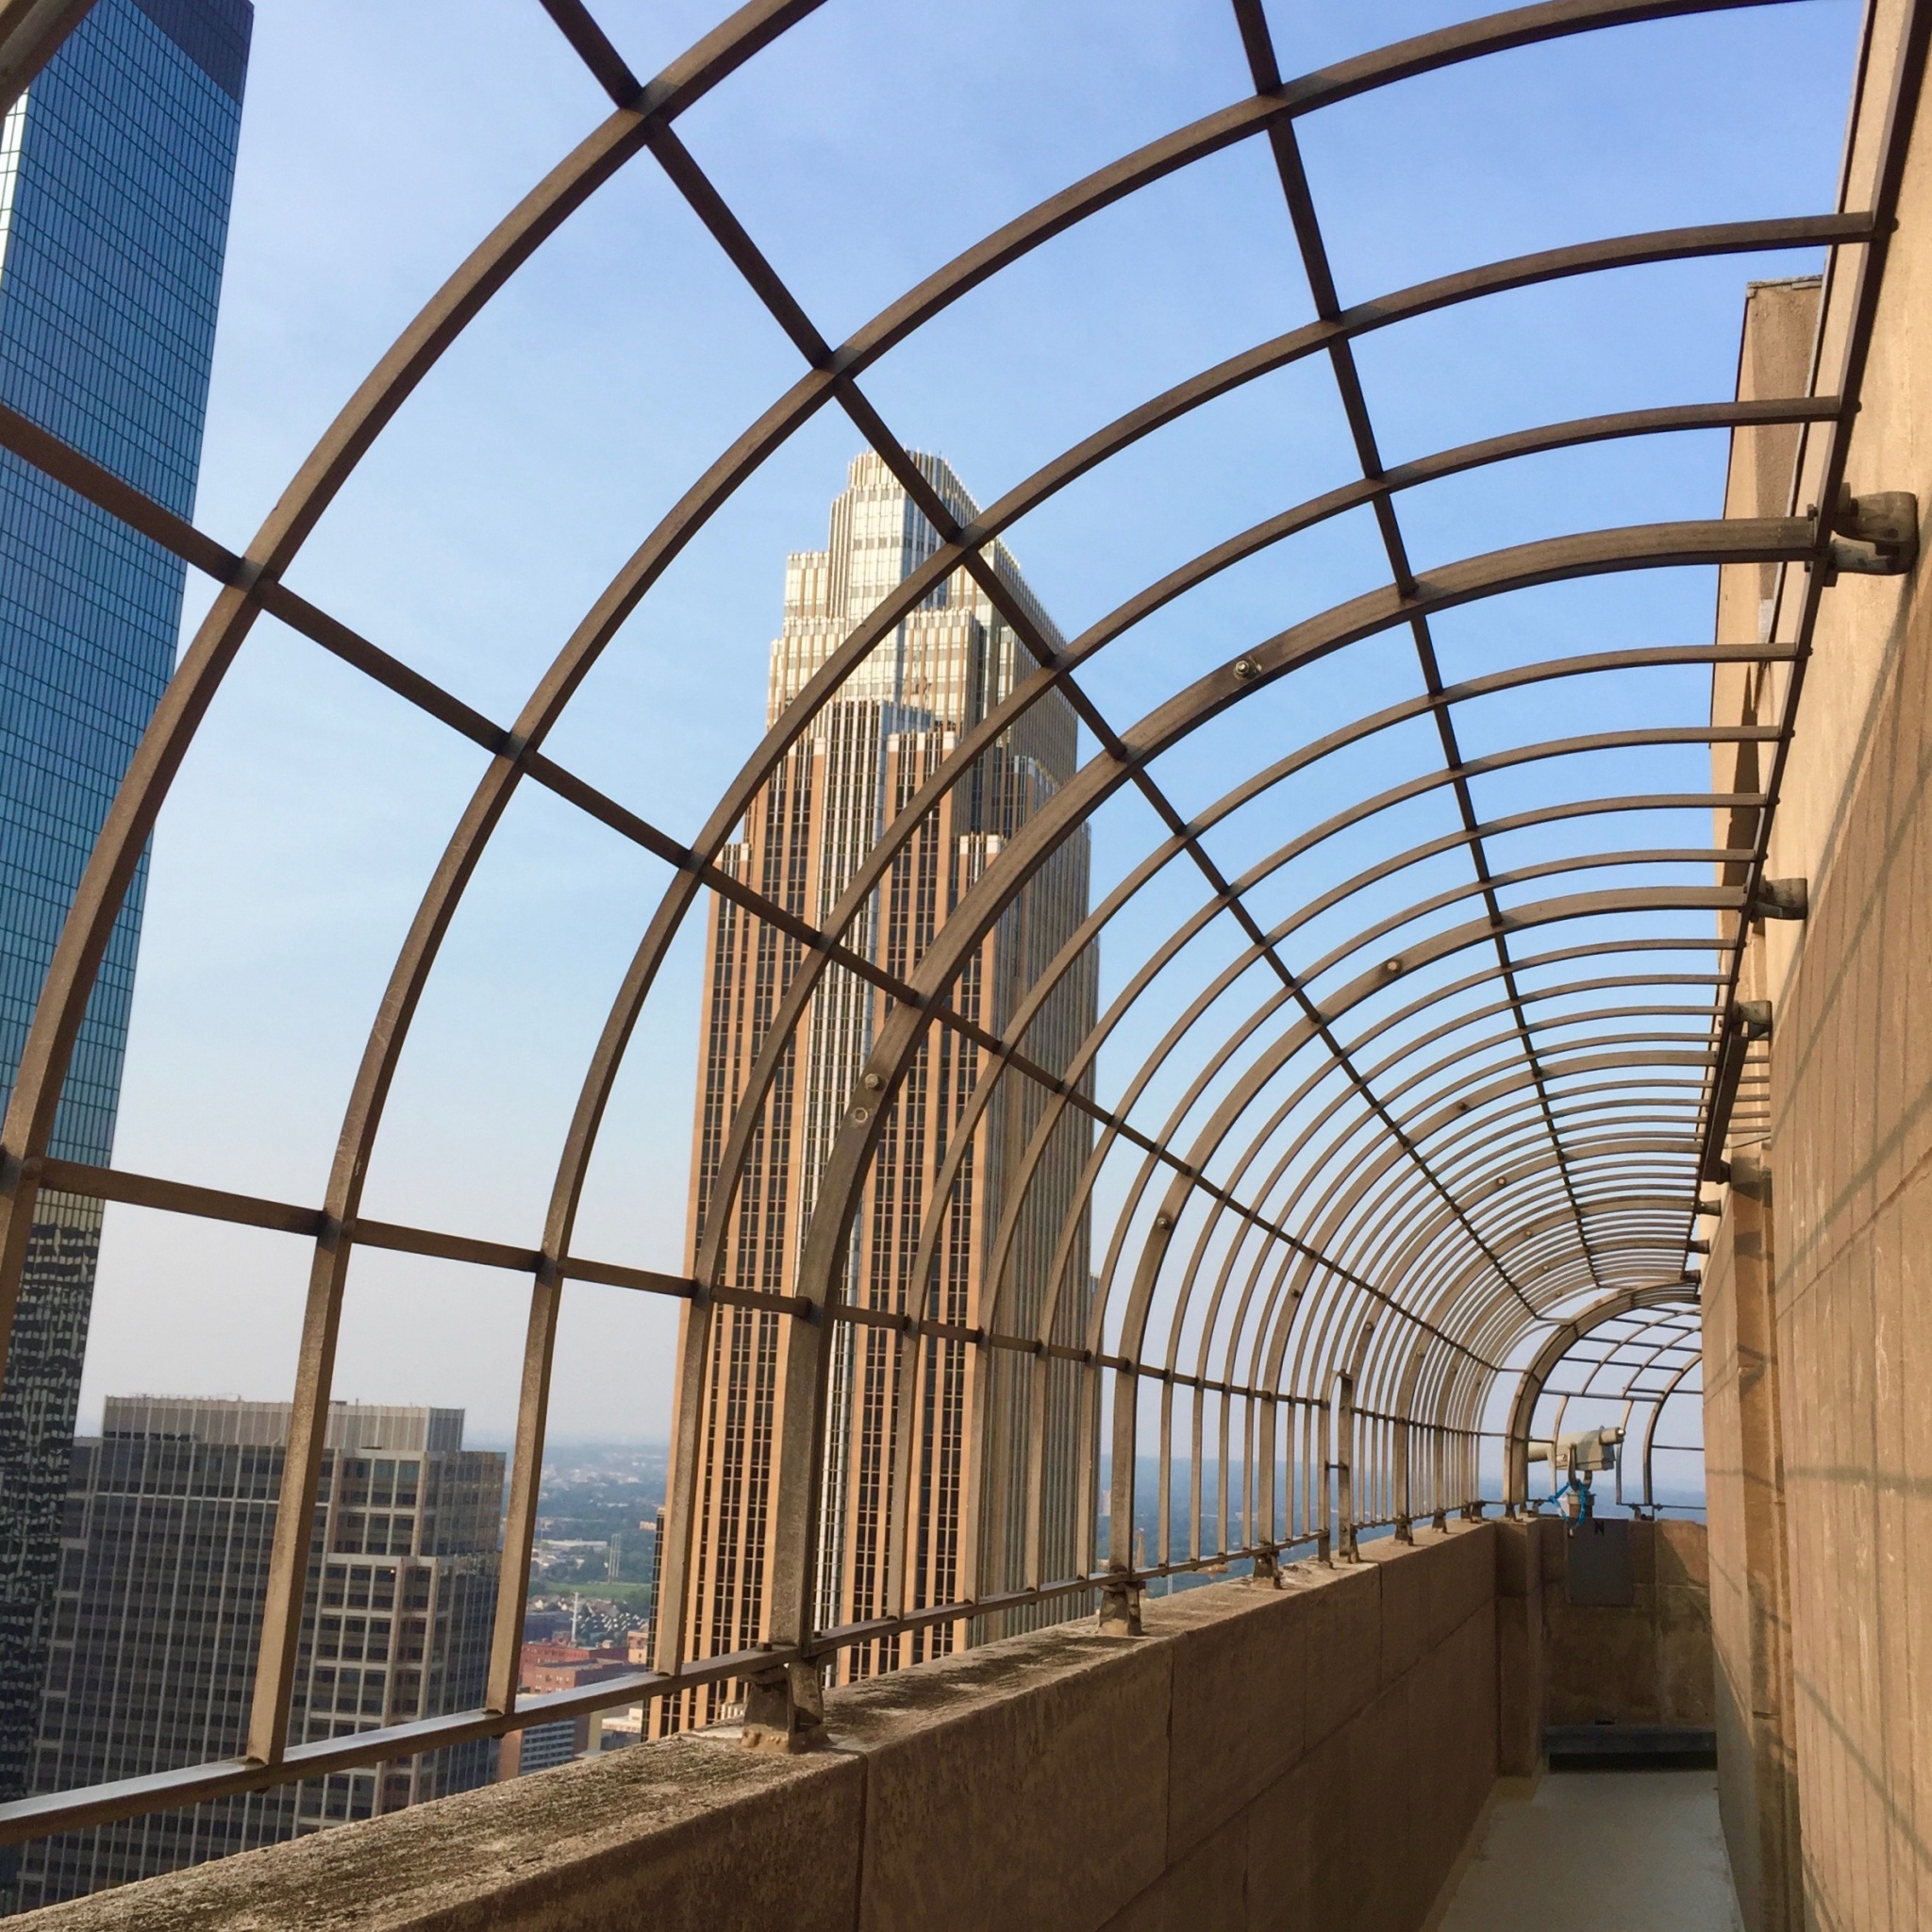 Observation deck at the Foshay